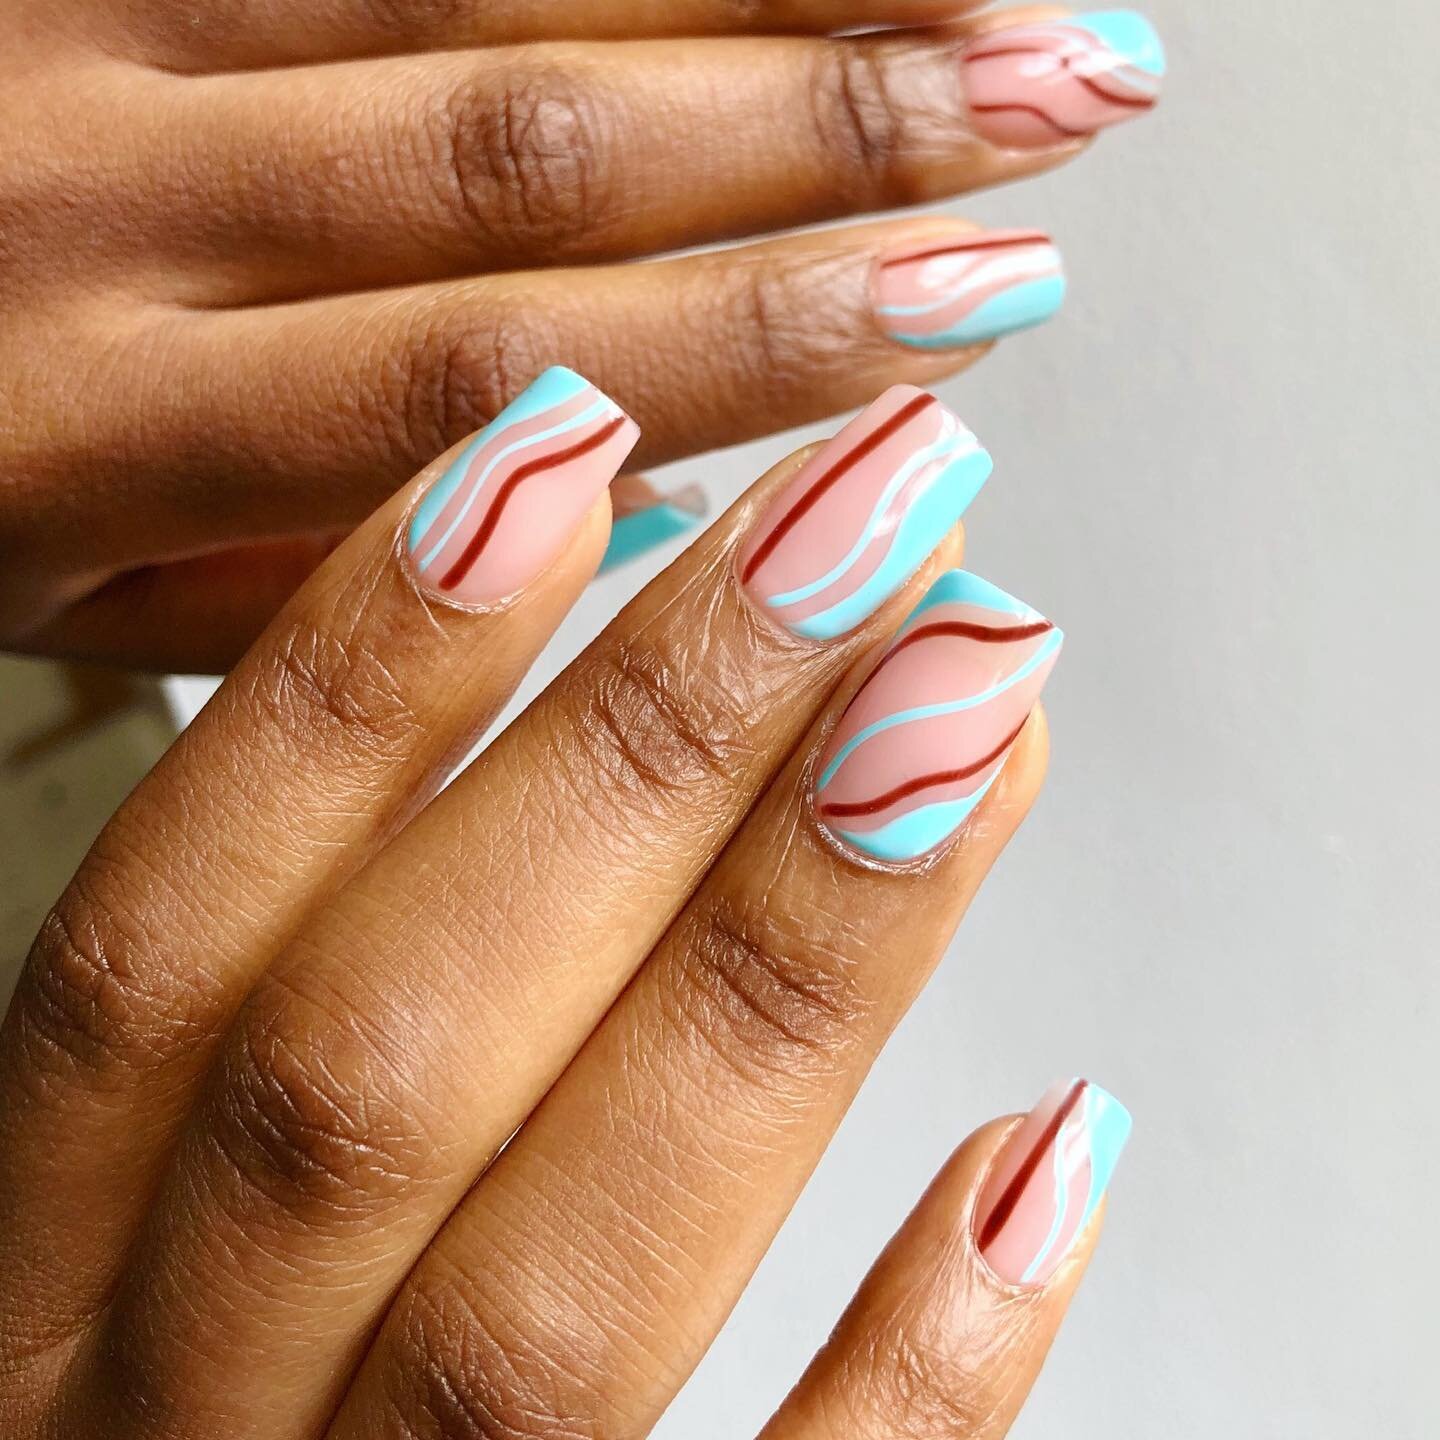 Do you consider these long or short? This is my clients version of short nails! And a rare appearance of square shape on my page, finished with some simple swirly line art.
Extensions with @inklondon Fit Tips

.
.
.
.
.
.
#nailart  #glasgownails #nai